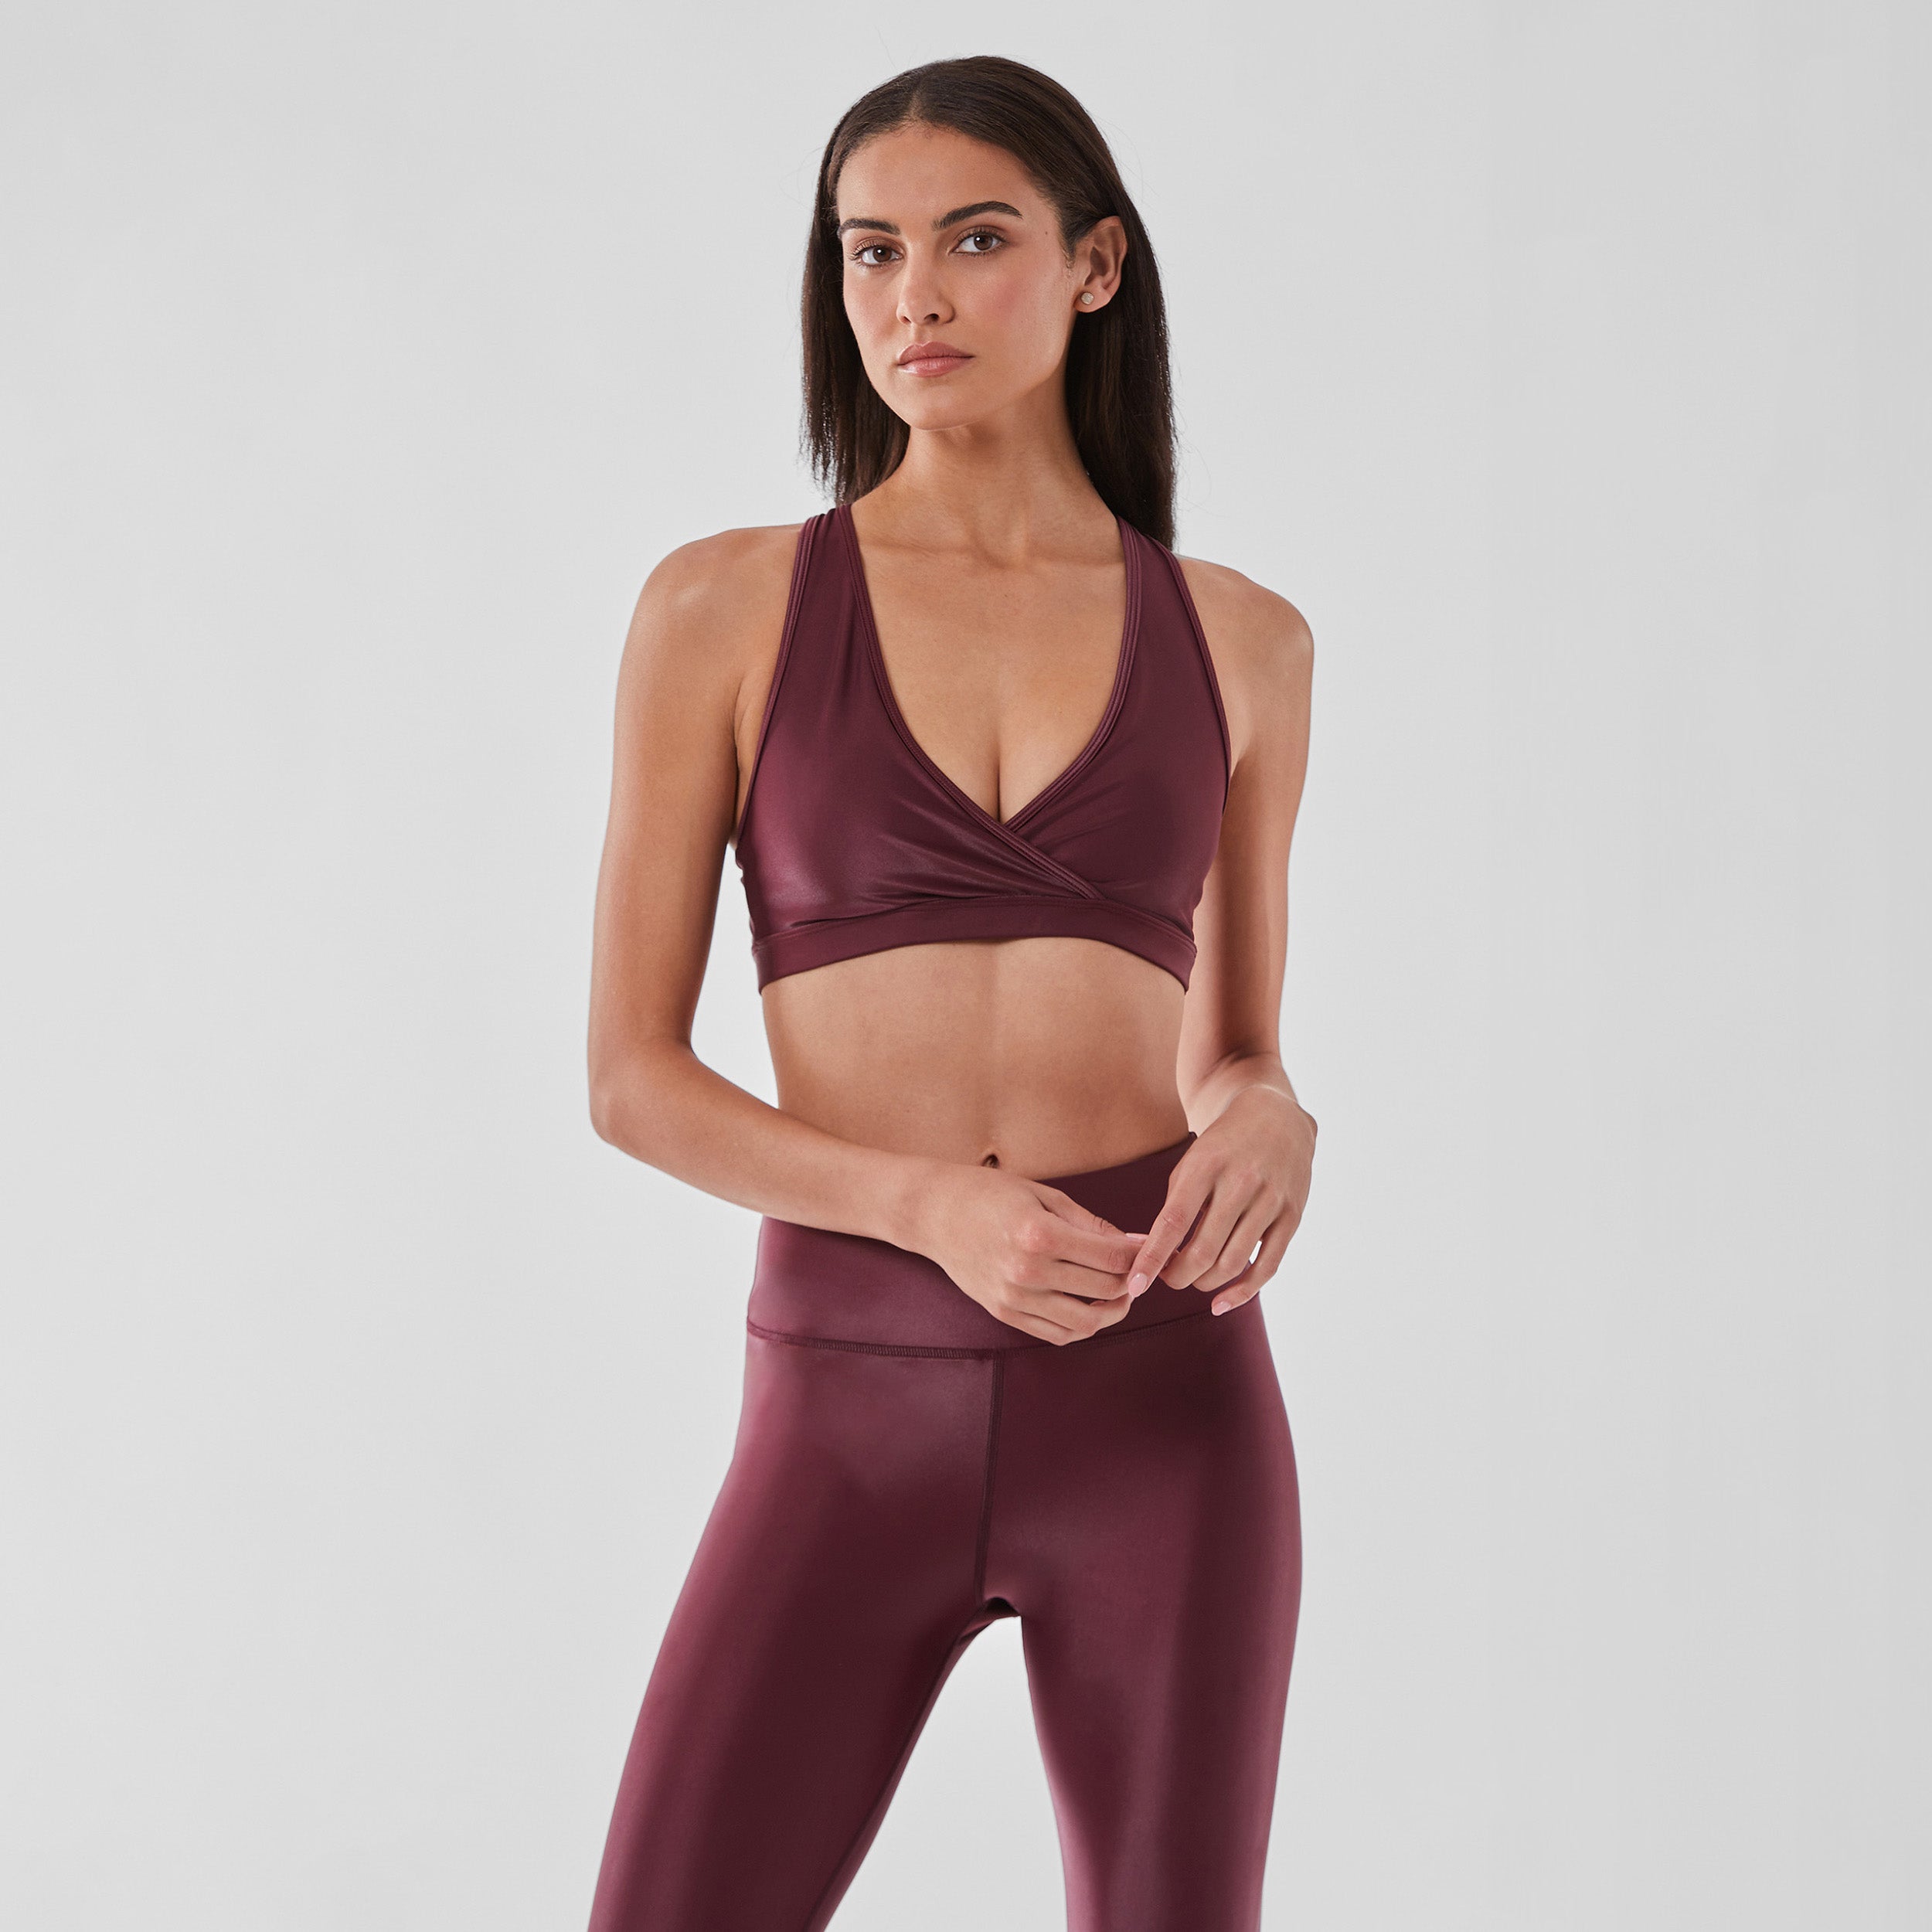 Woman wearing sleek and supportive dark red colored v-neck bra features lightweight and lustrous shine.